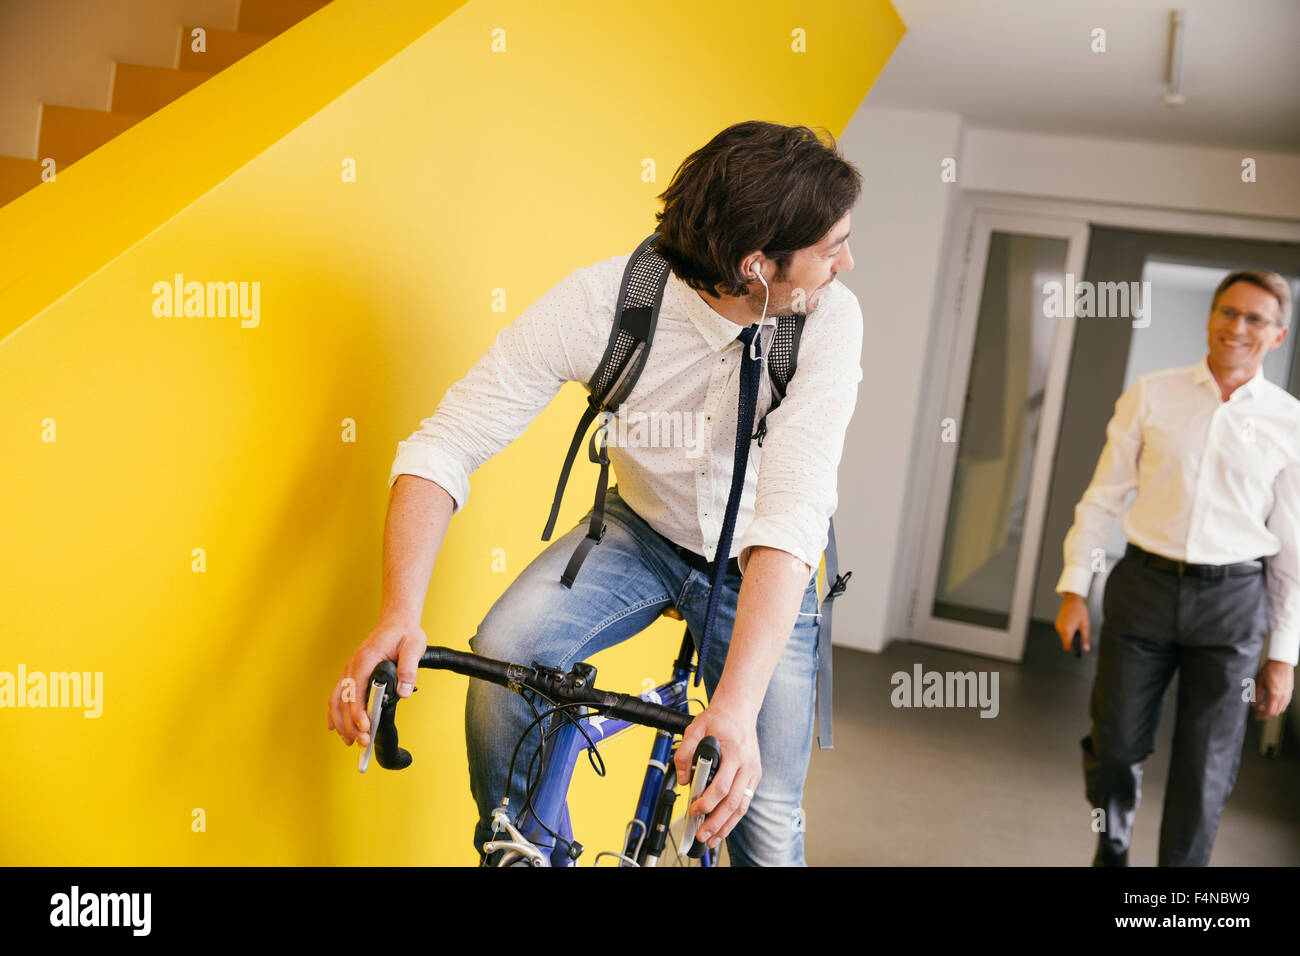 Man with racing bicycle in an office Stock Photo